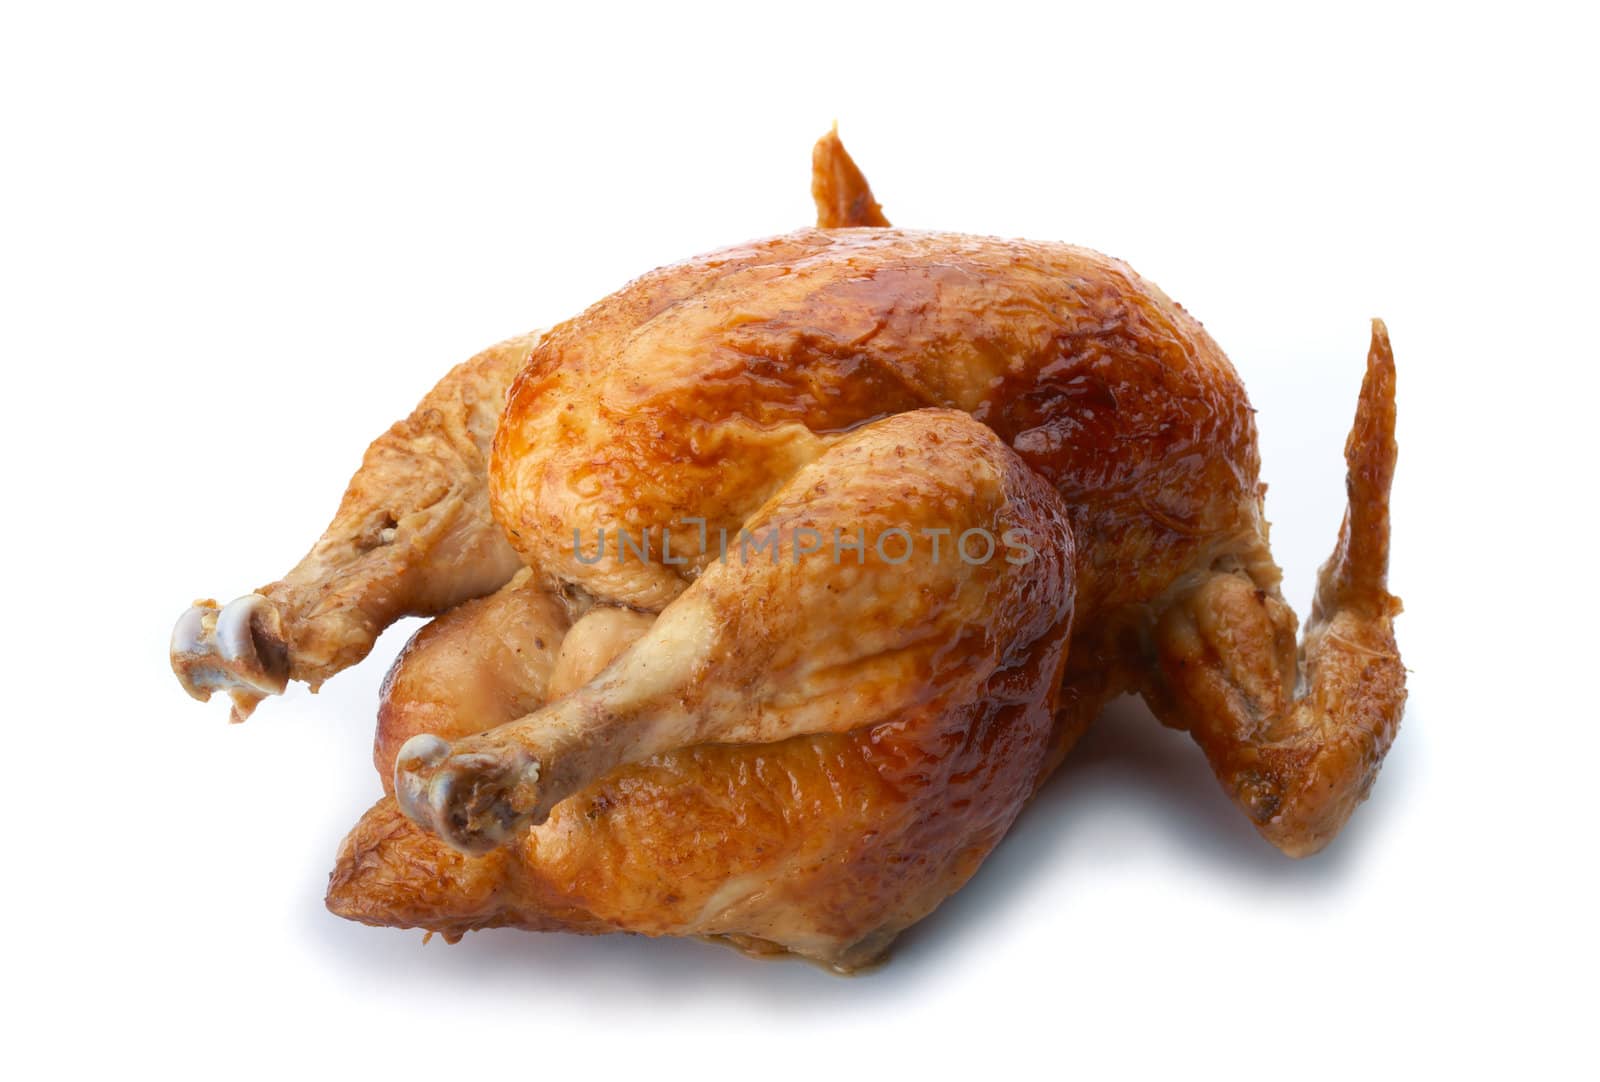 Whole grilled chicken on white background.